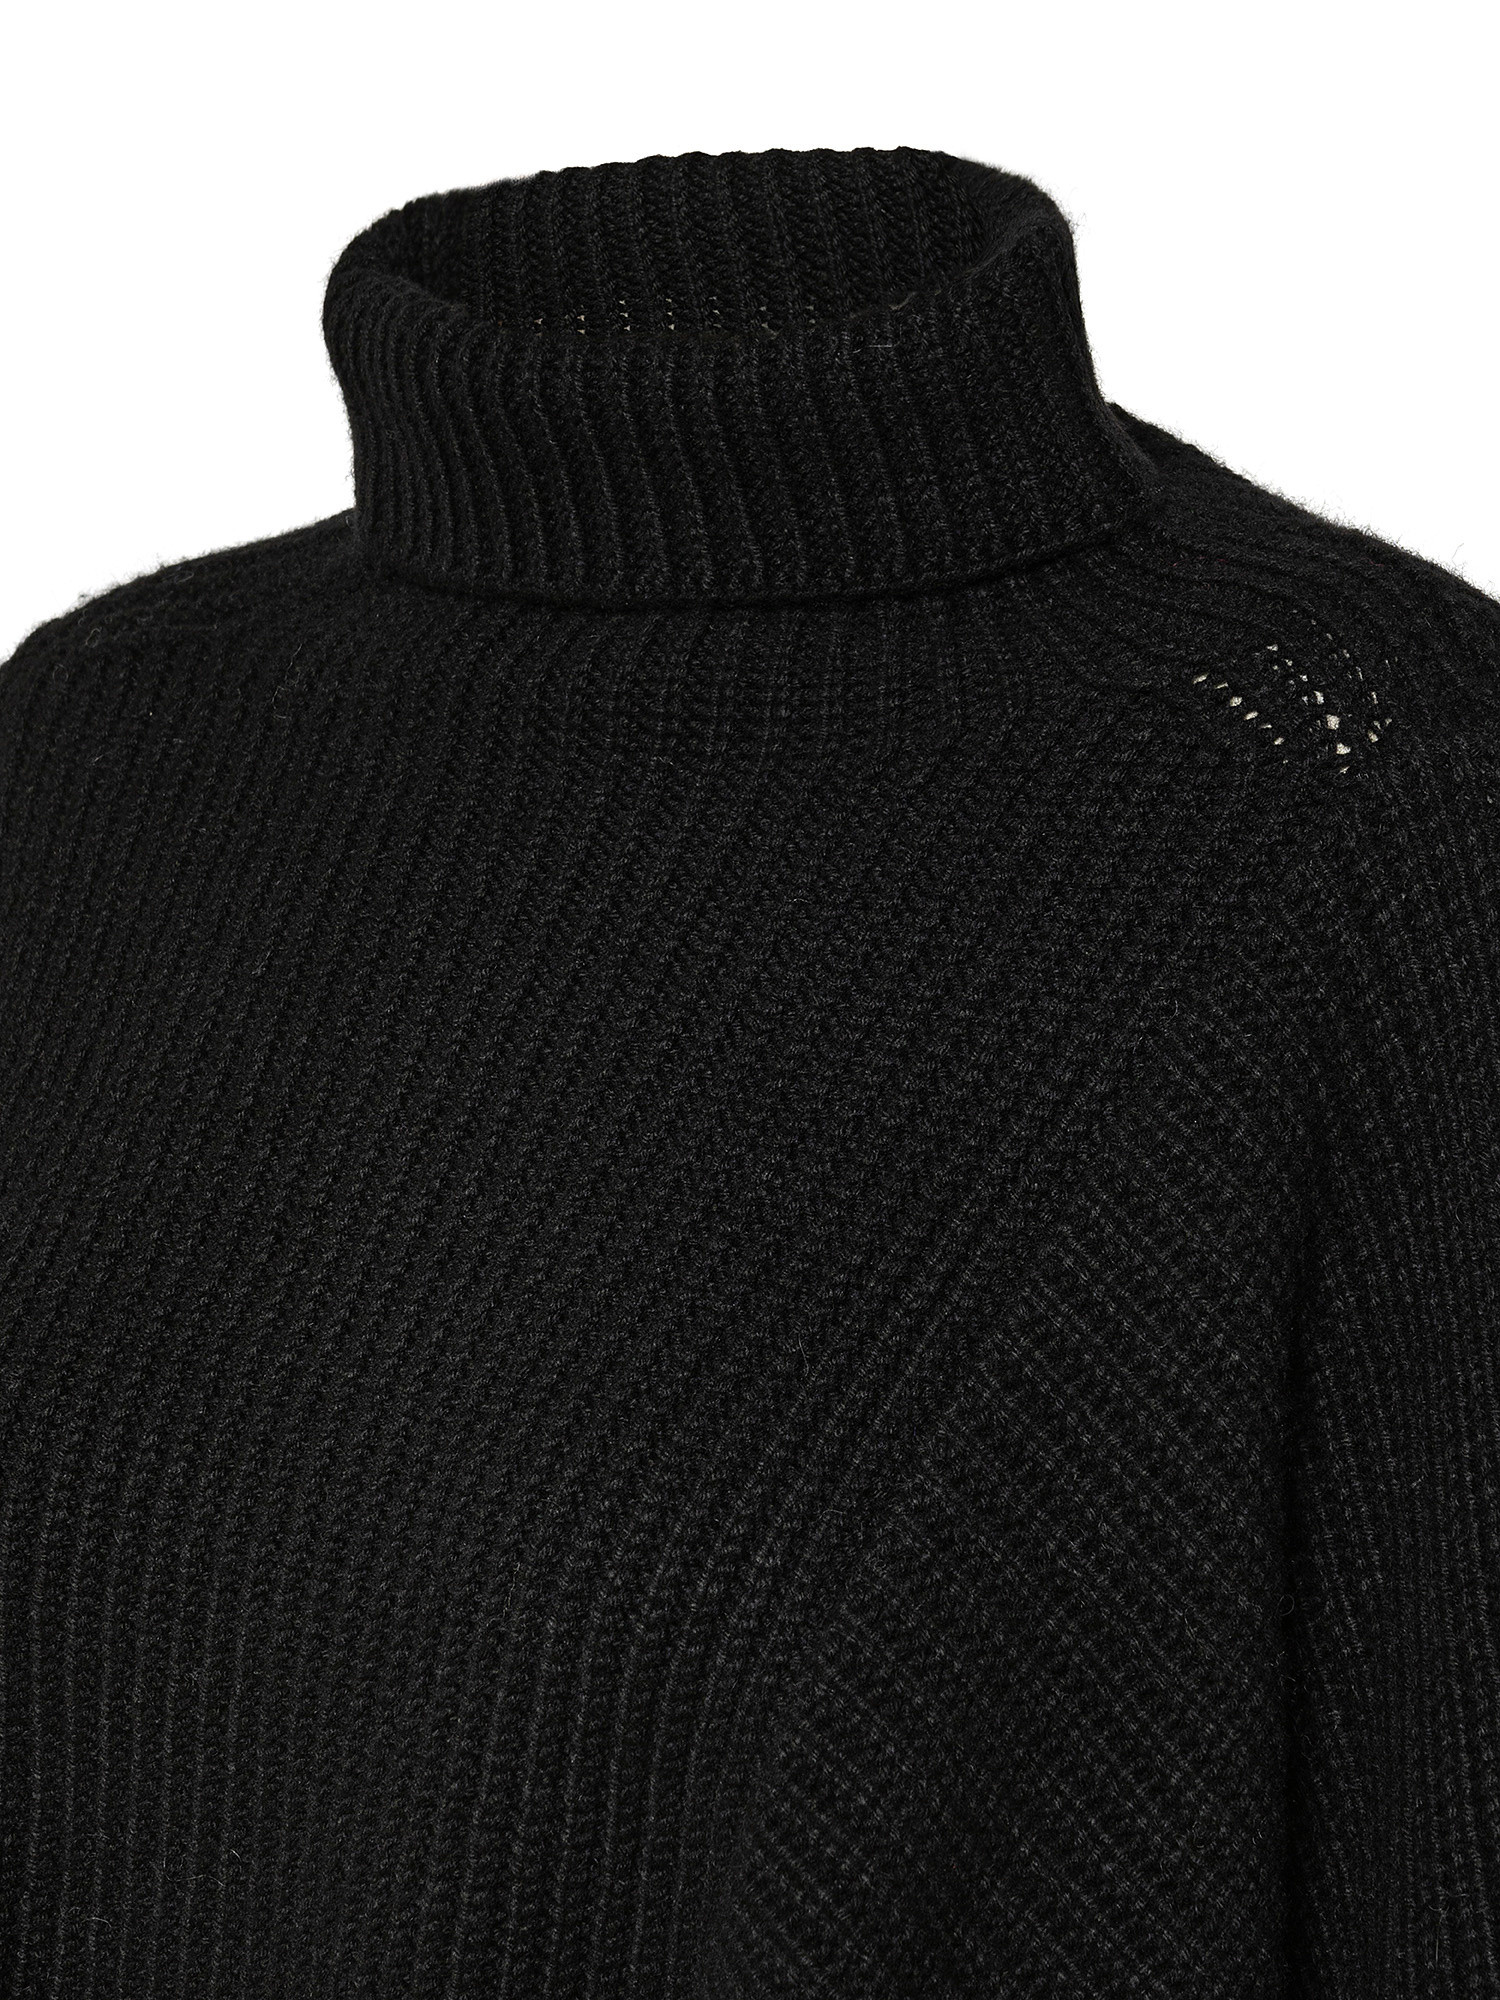 Oversized cropped sweater in ribbed wool blend, Black, large image number 2